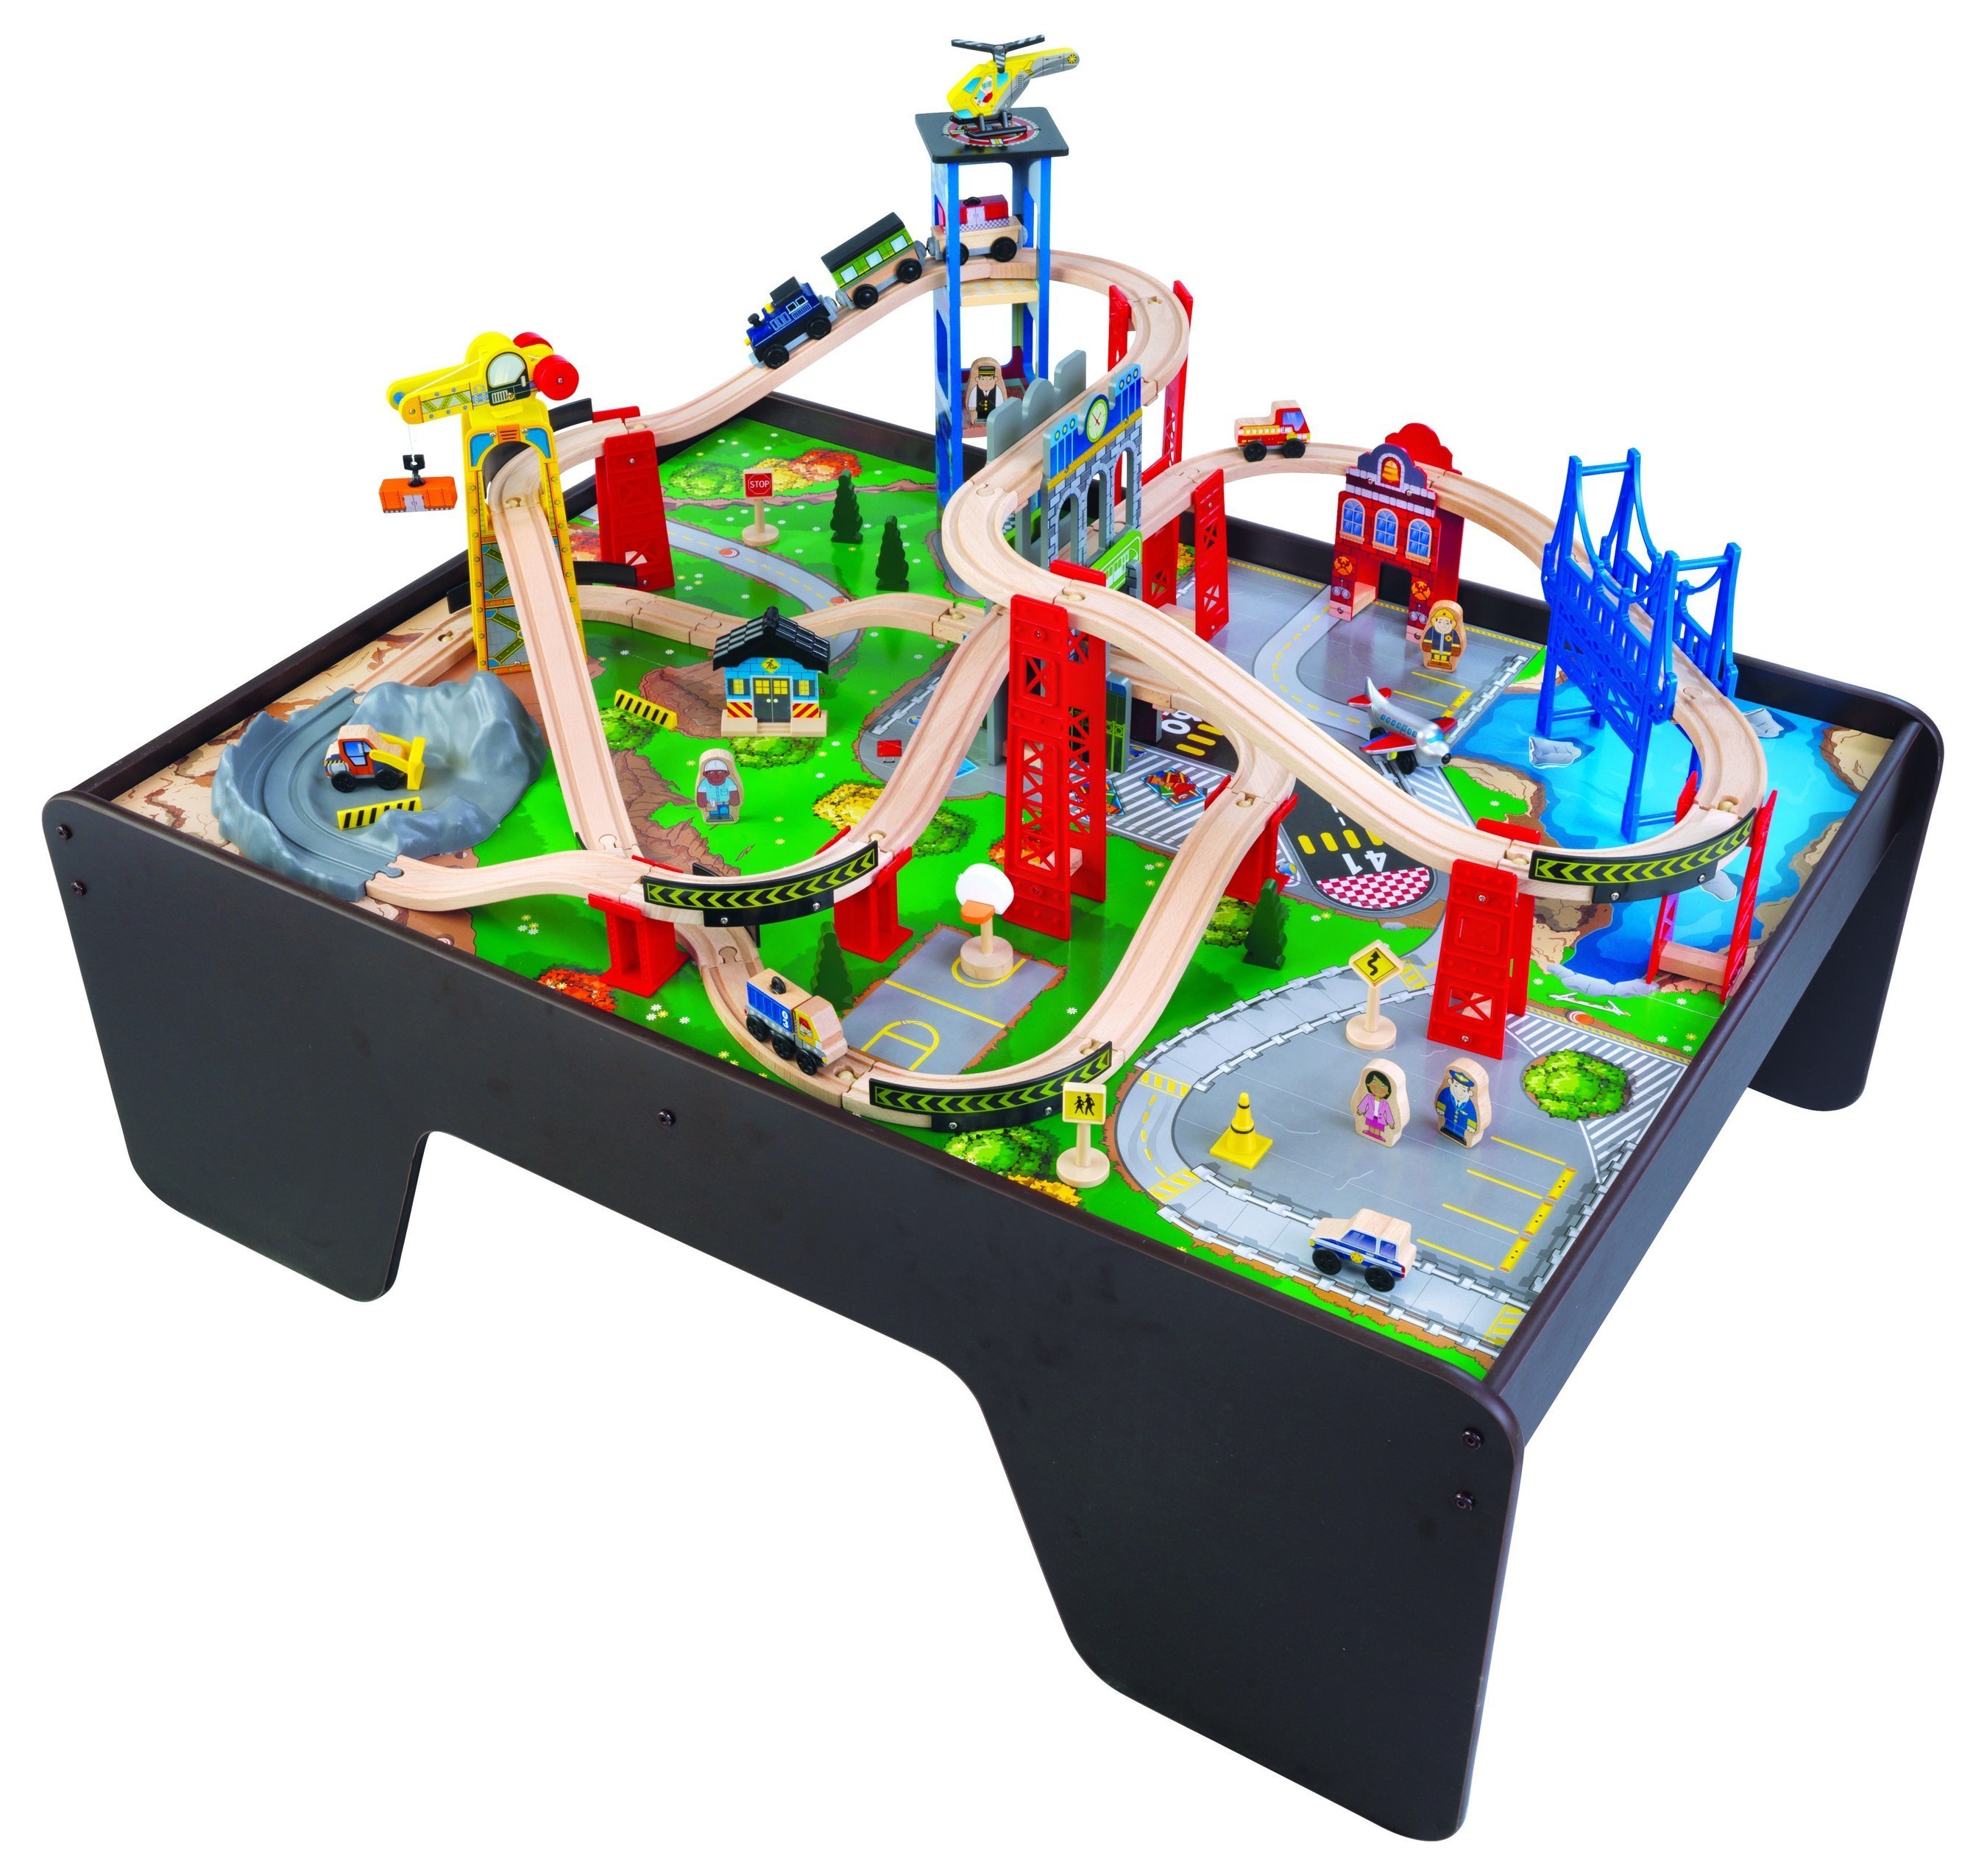 Super Expressway Train Set and Table: Customizable wooden set full of fun, interactive accessories. Ages 3 Years ; Available in BJ's Wholesale Clubs and on BJs.com